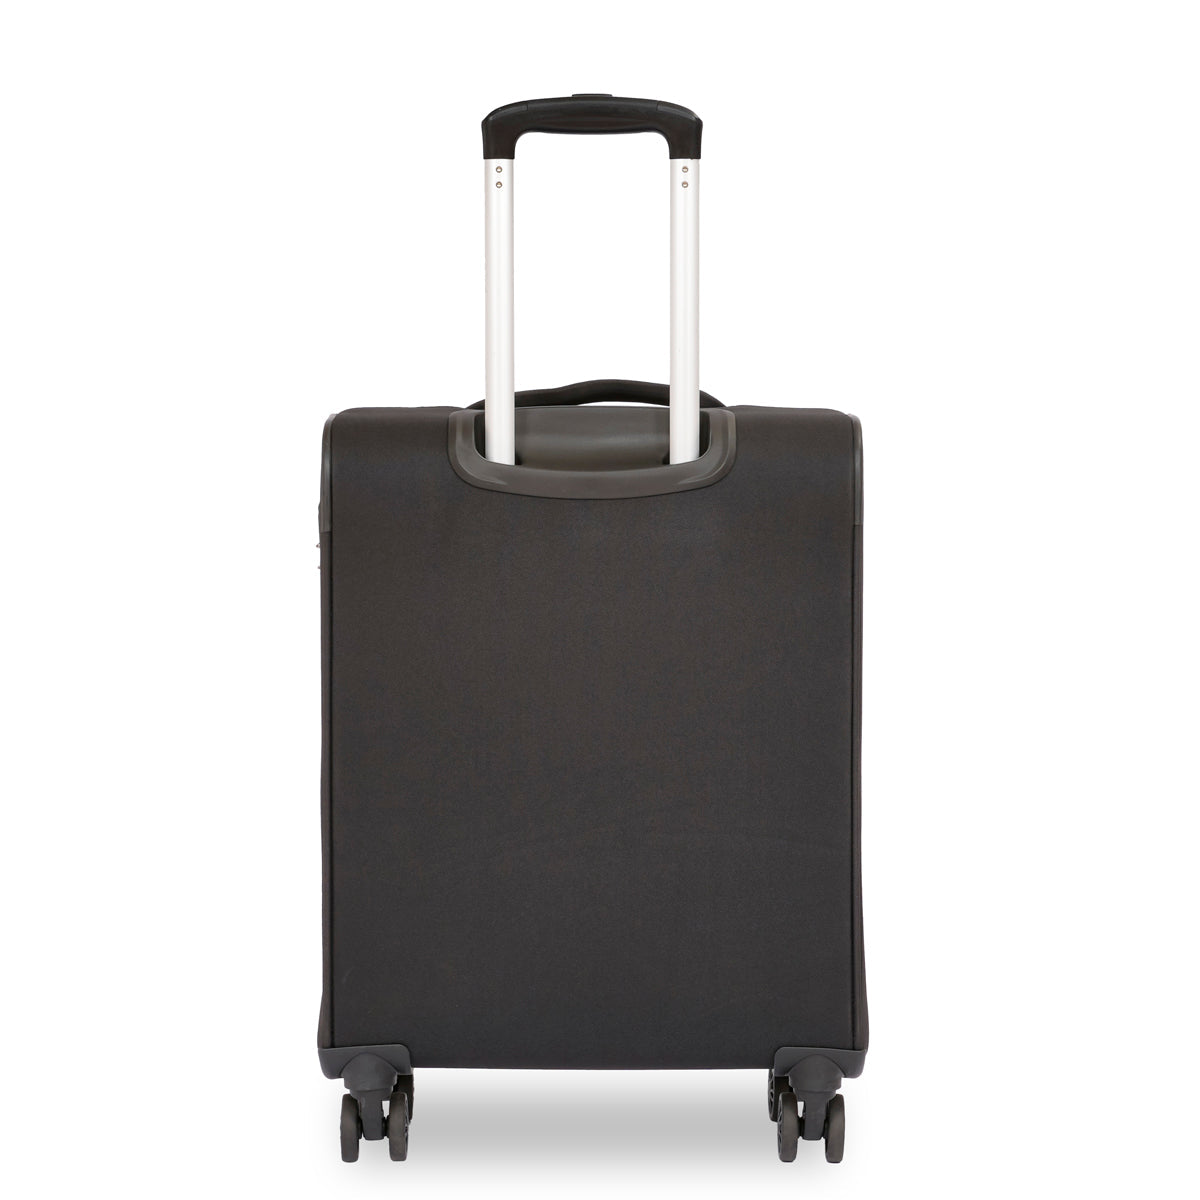 United Colors of Benetton Archimedes Soft Luggage Grey Cabin